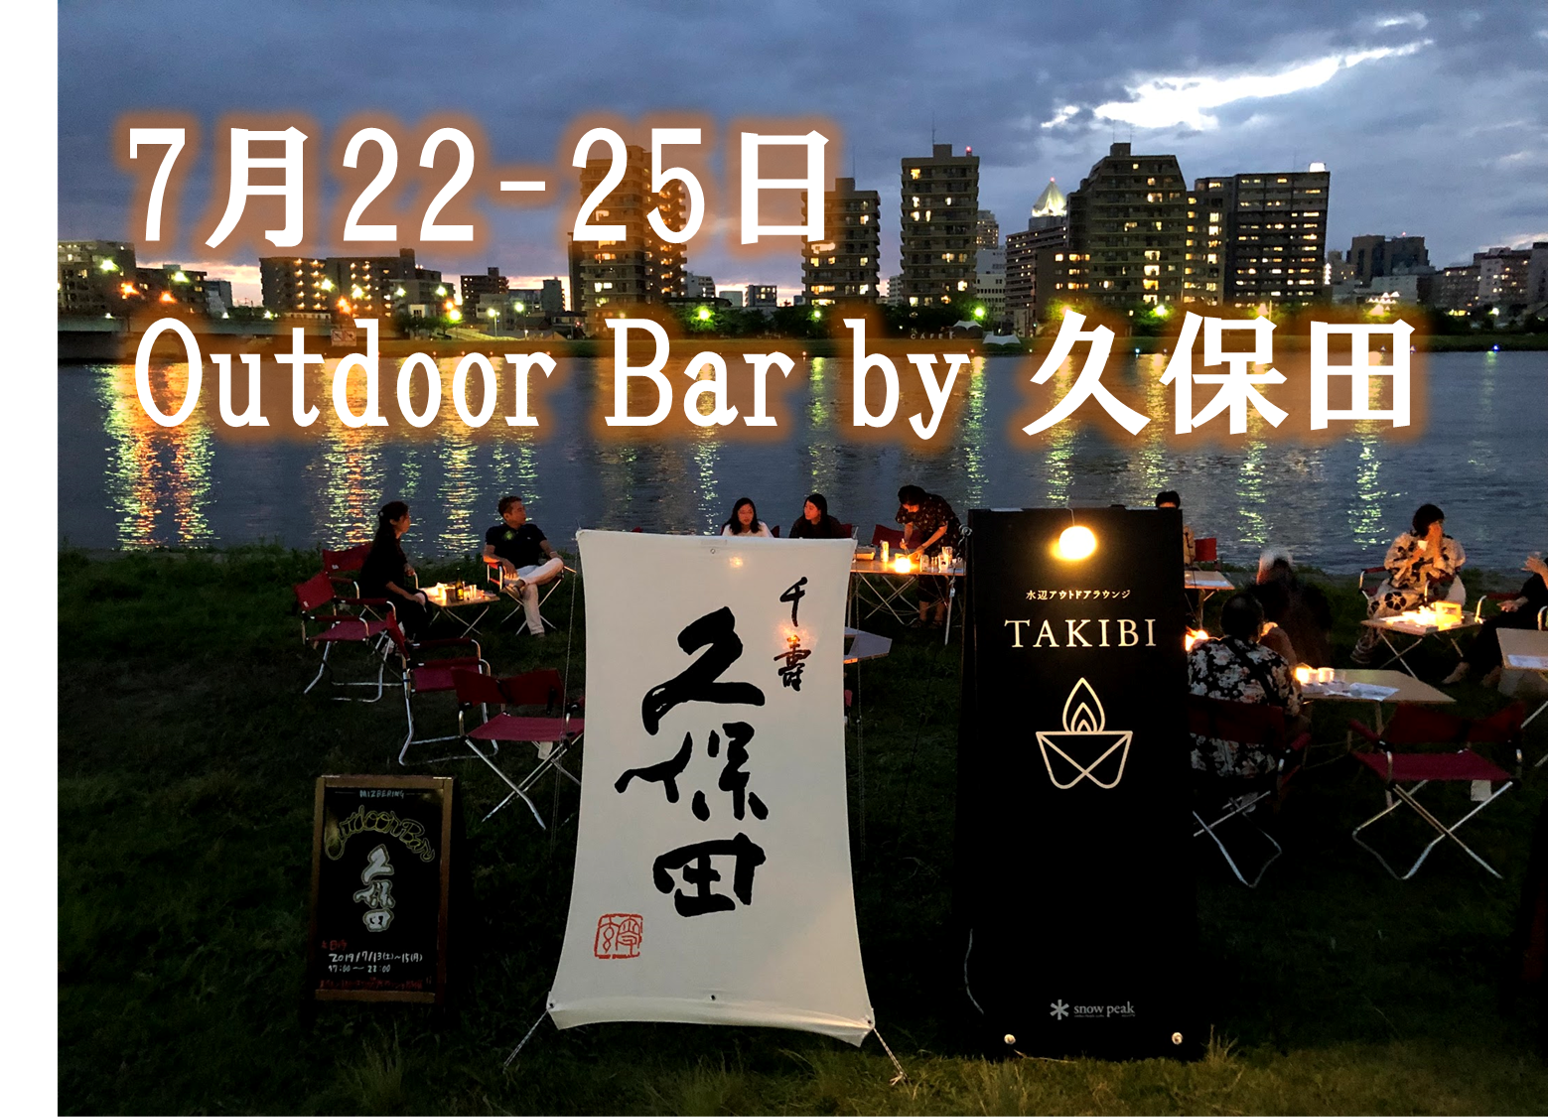 Outdoor Bar by 久保田 7月22～25日